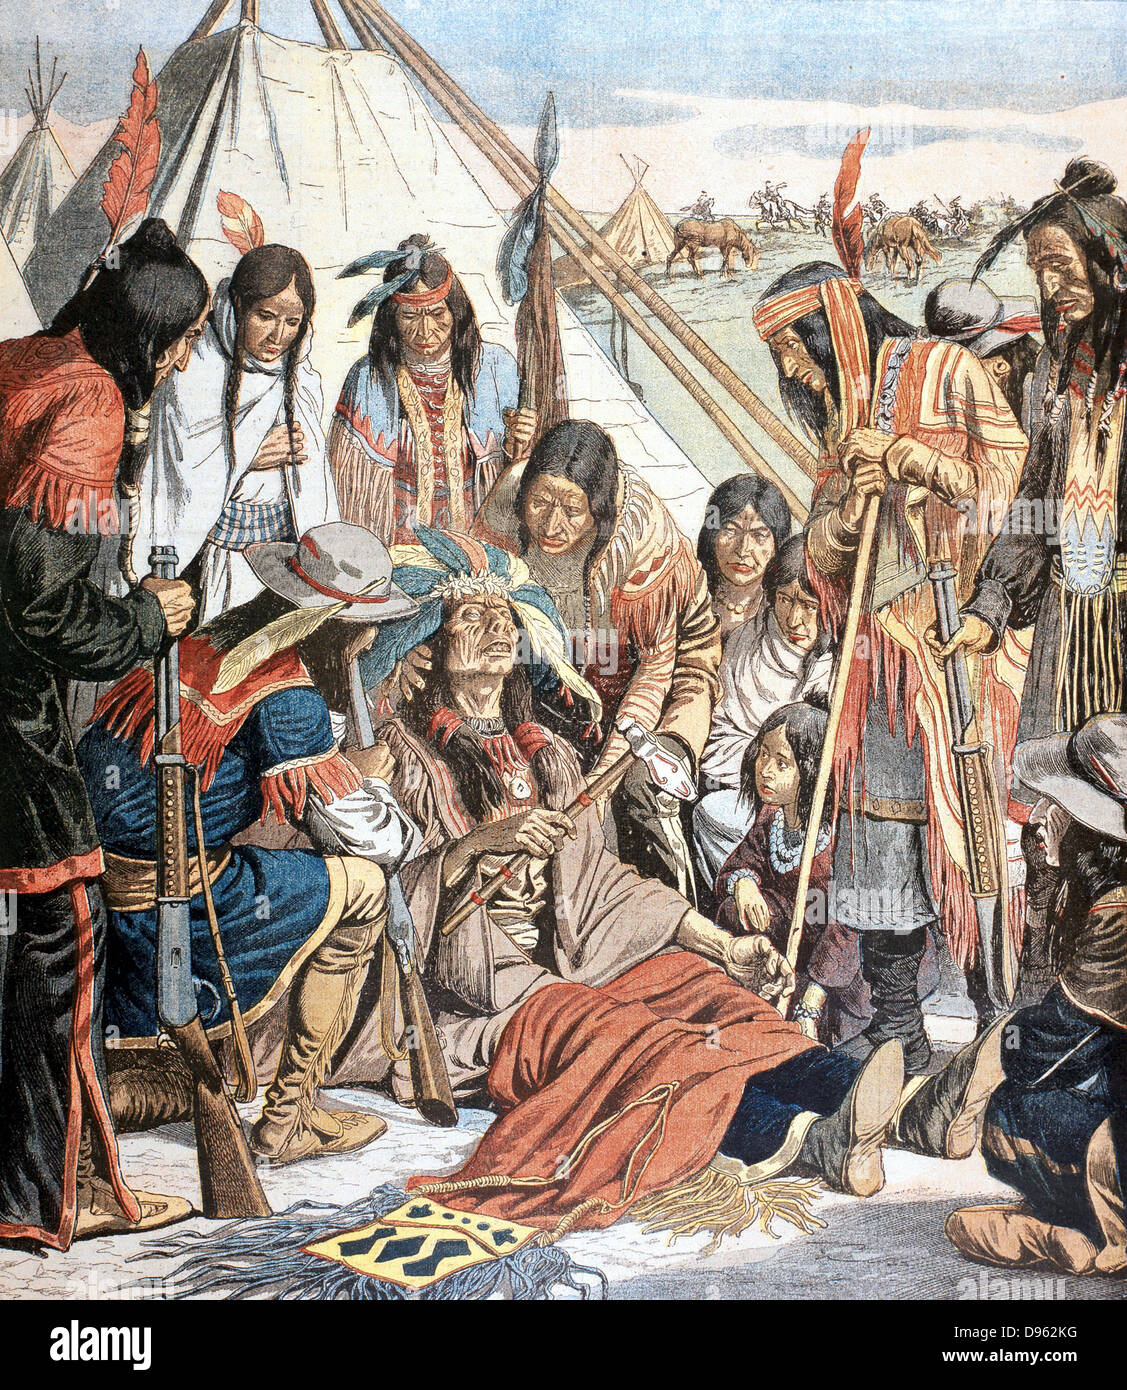 Death of Joseph (c1840-1904) Chief of the Nez-Perce. Led North American Indian tribes in resistance to white settlers (1877). From 'Le Petit Journal', Paris, October 1904. Stock Photo